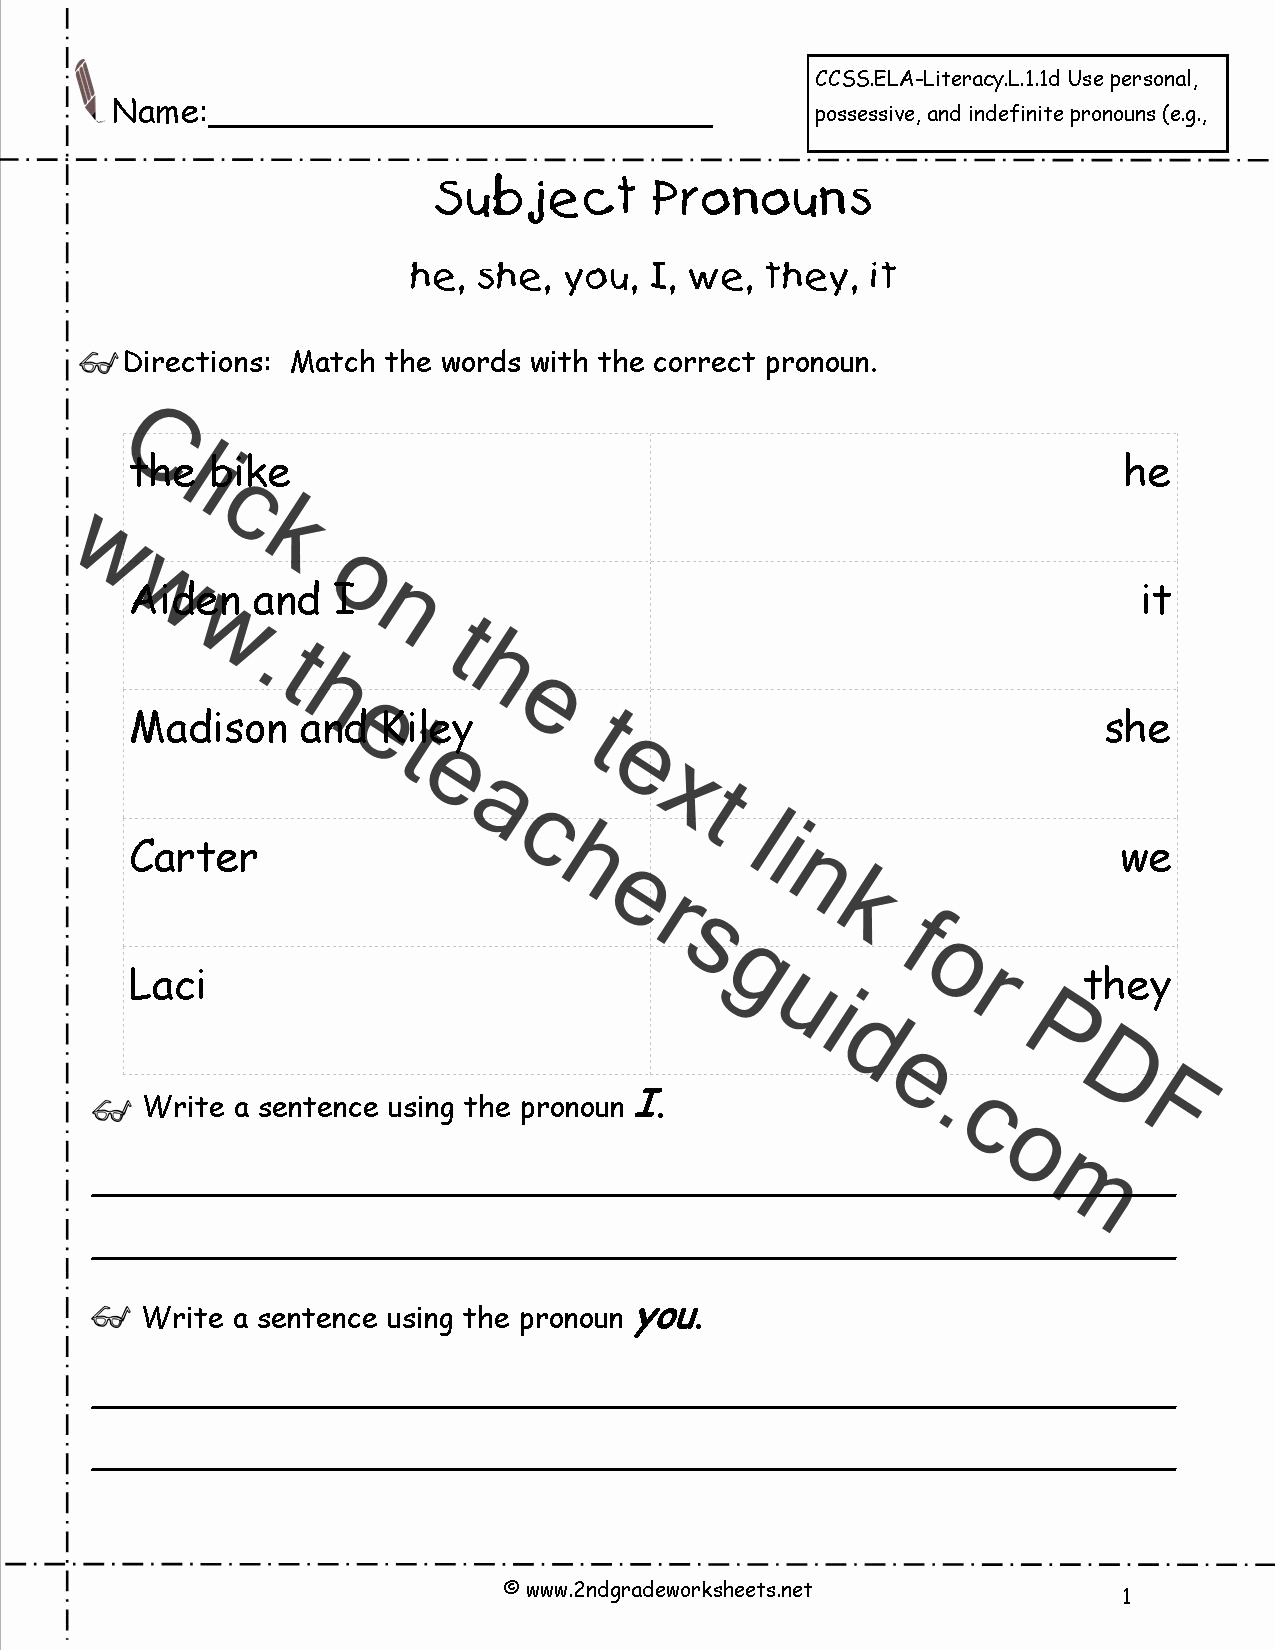 Free Pronoun Worksheets Awesome Pronouns Nouns Worksheets From the Teacher S Guide